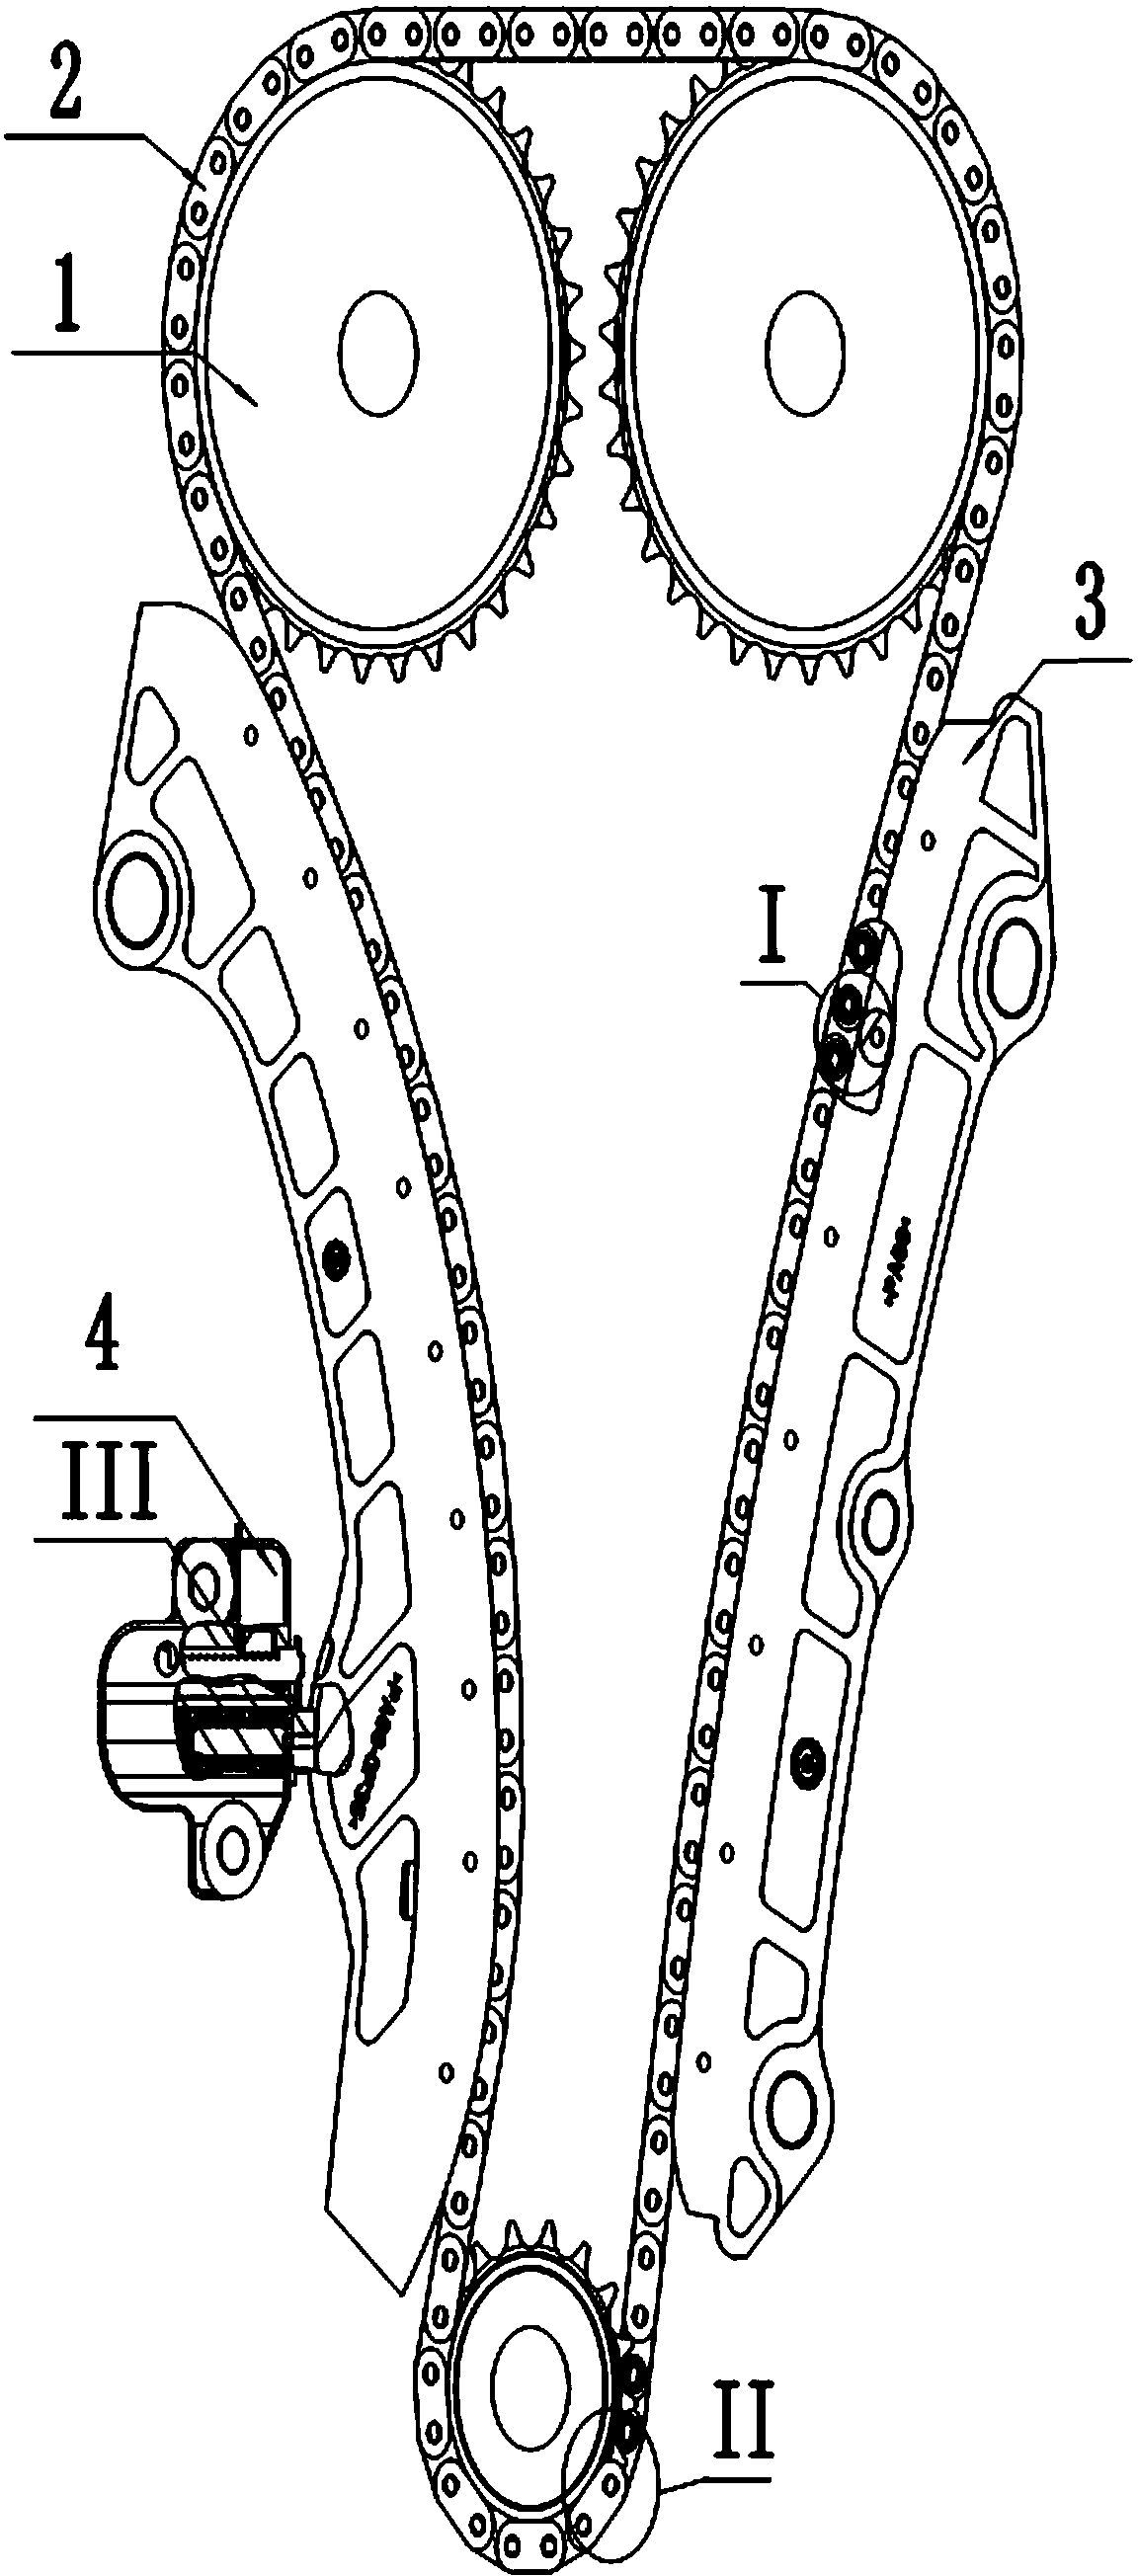 Engine chain timing system